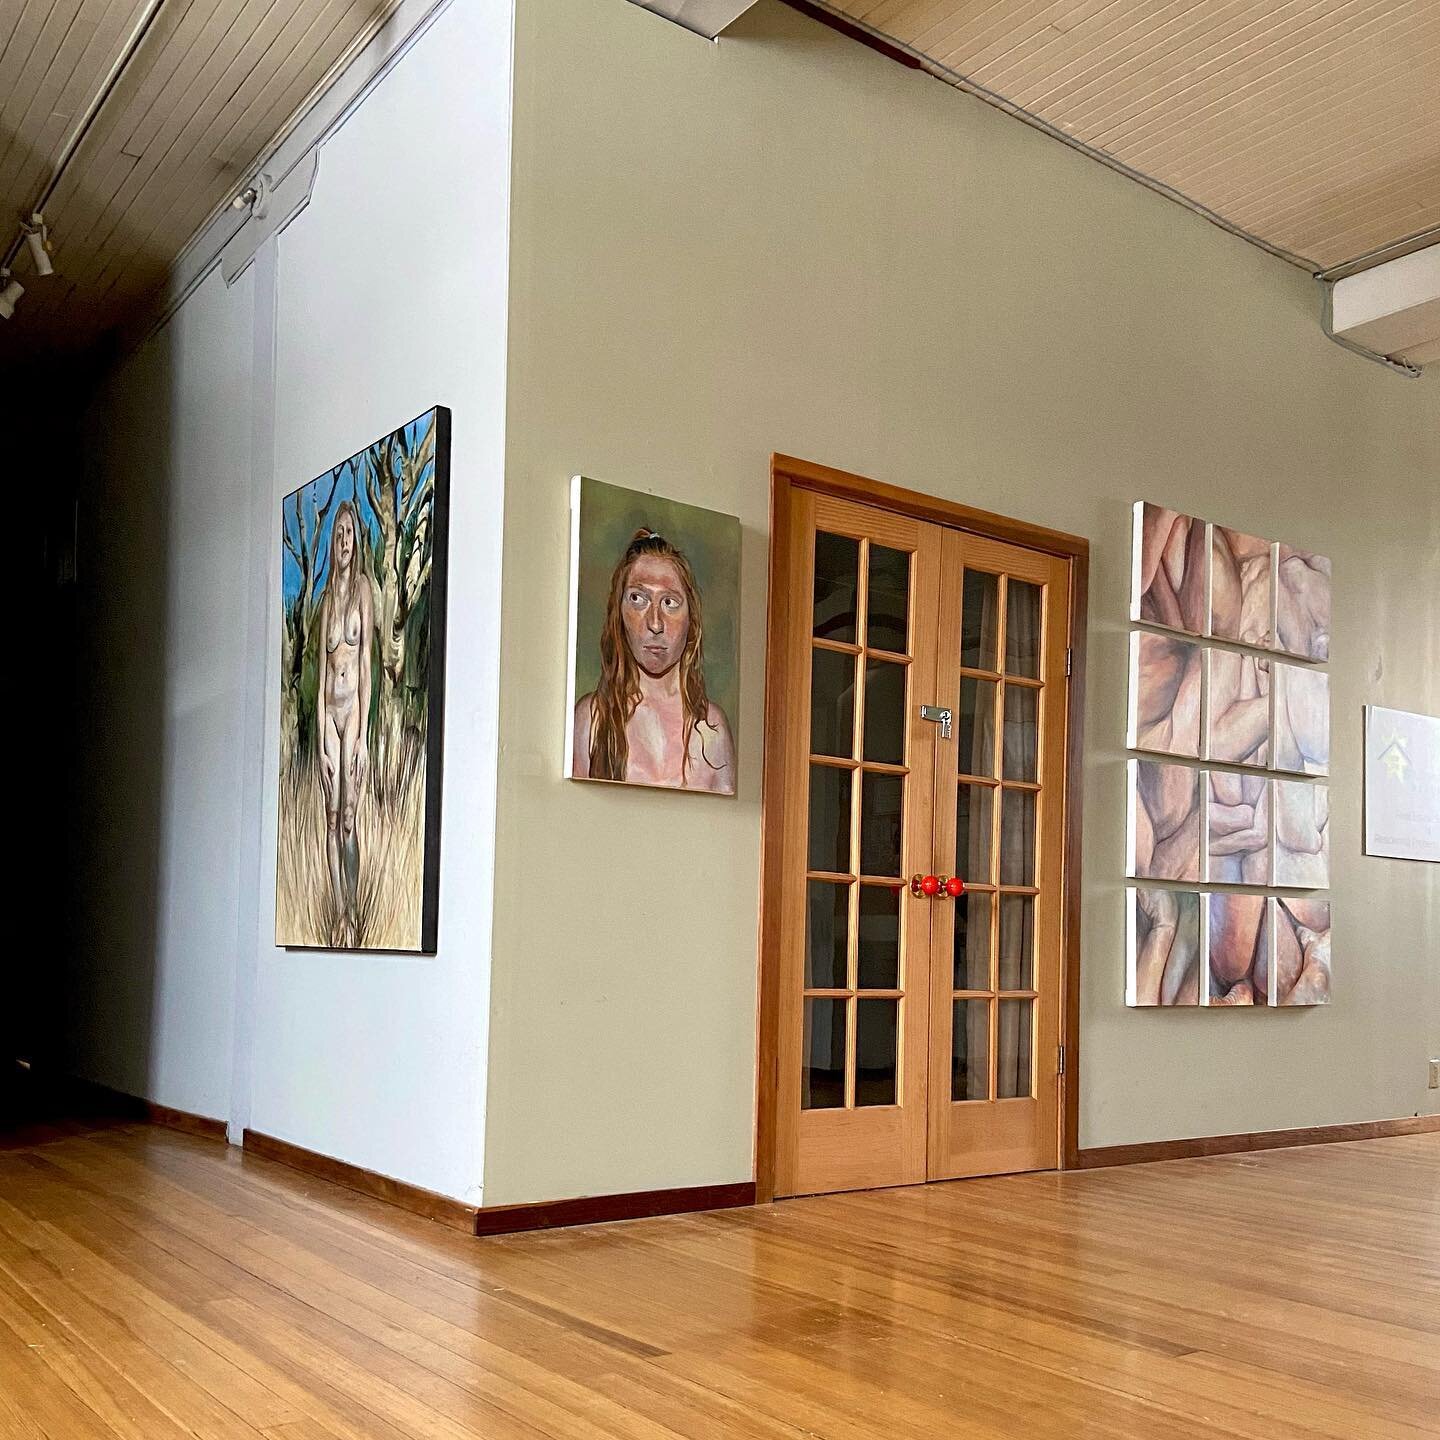 Everything&rsquo;s hung up! Excited to start doing shows here! 
.
.
.
.
.
.
.
.
.
.
.
.
.
.
.
#lgbtartist #artist #oilpaintings #artstudio #studioartist #painter #oiloncanvas #hungup #exhibitions #figurativeart #figurativeartist #newstudio #studio #w